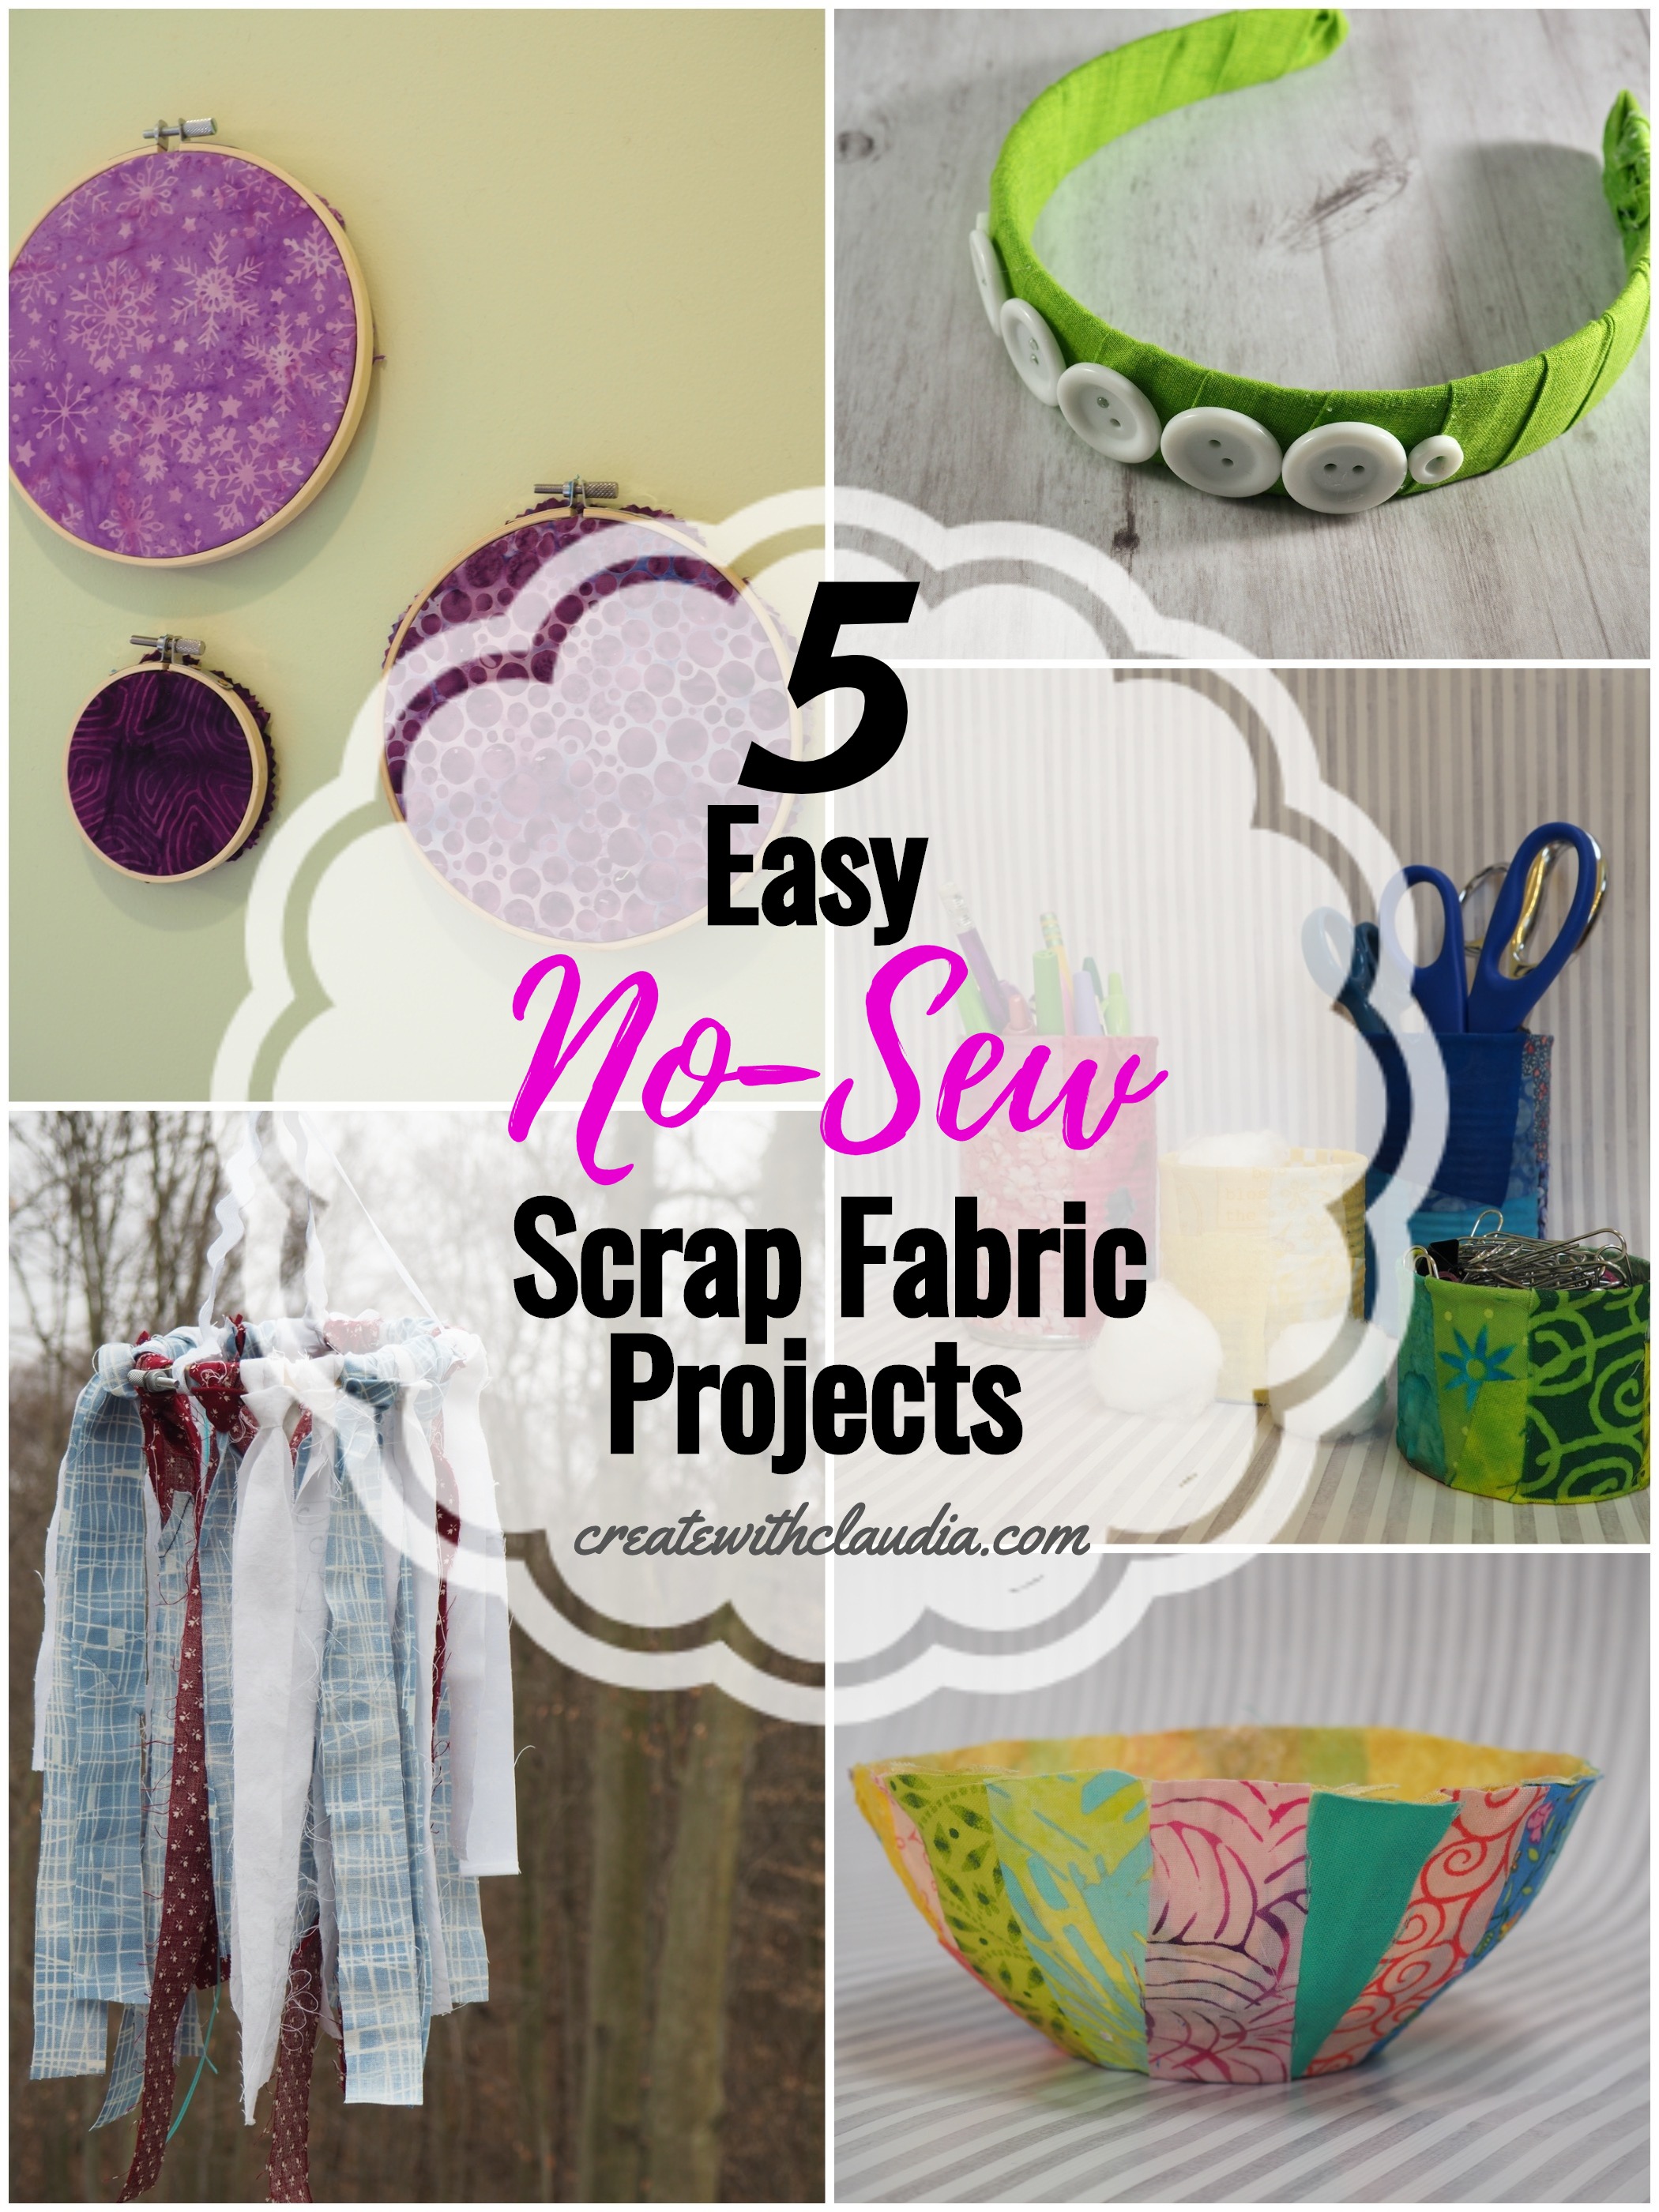 25 Awesome Scrap Fabric Projects - Sew Crafty Me